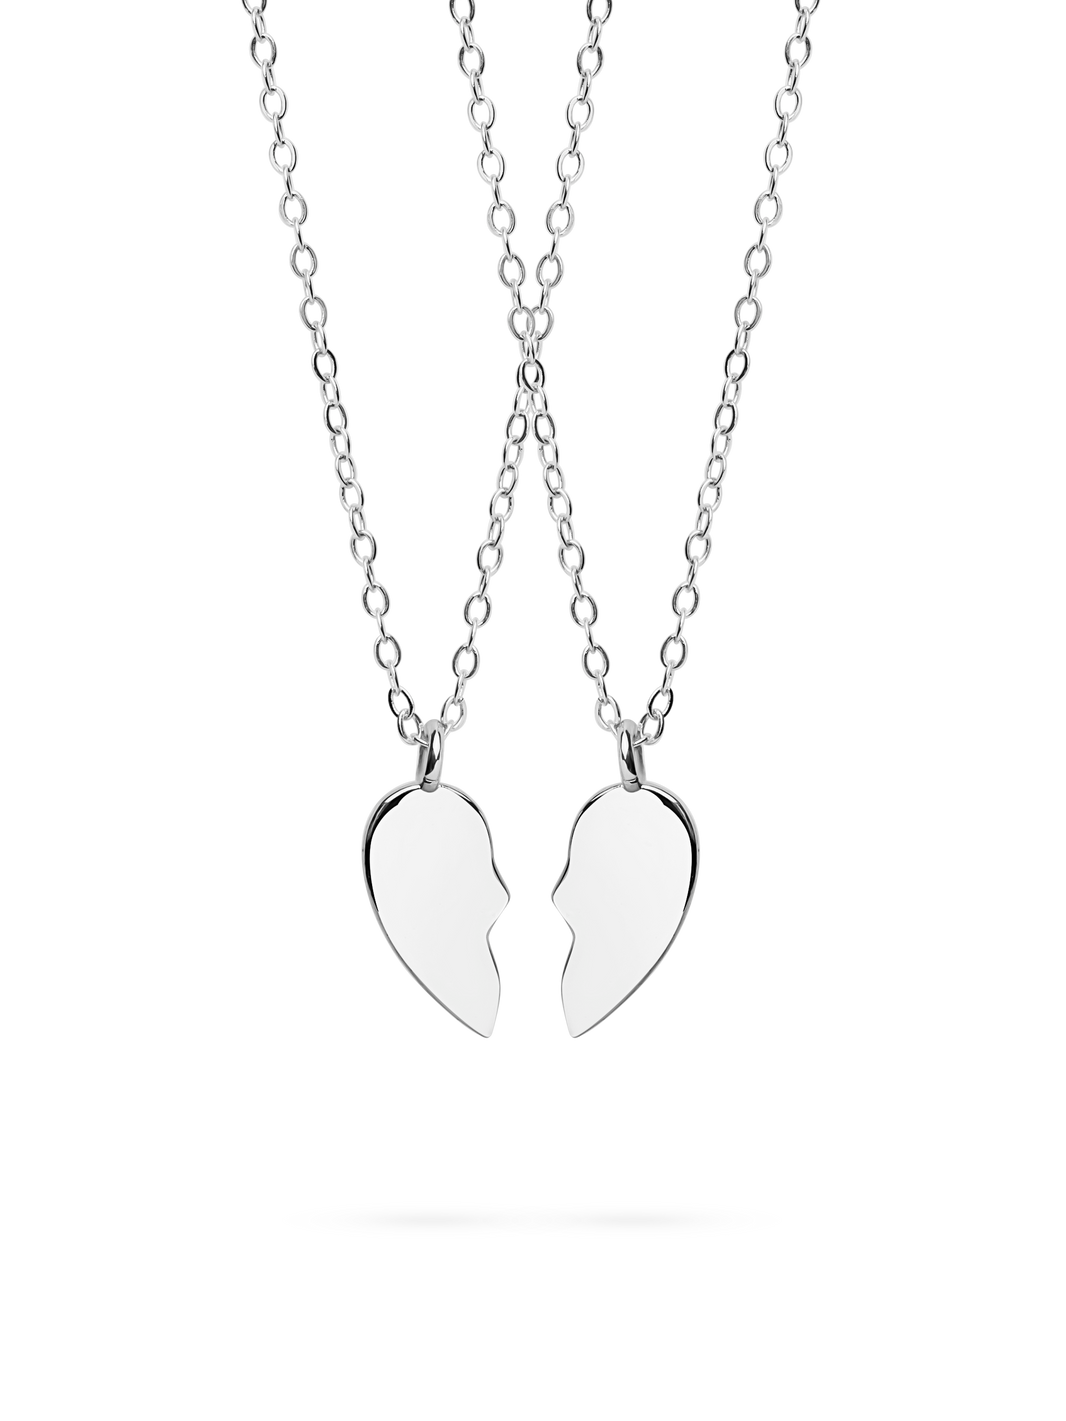 shared heart necklace 925 sterling silver